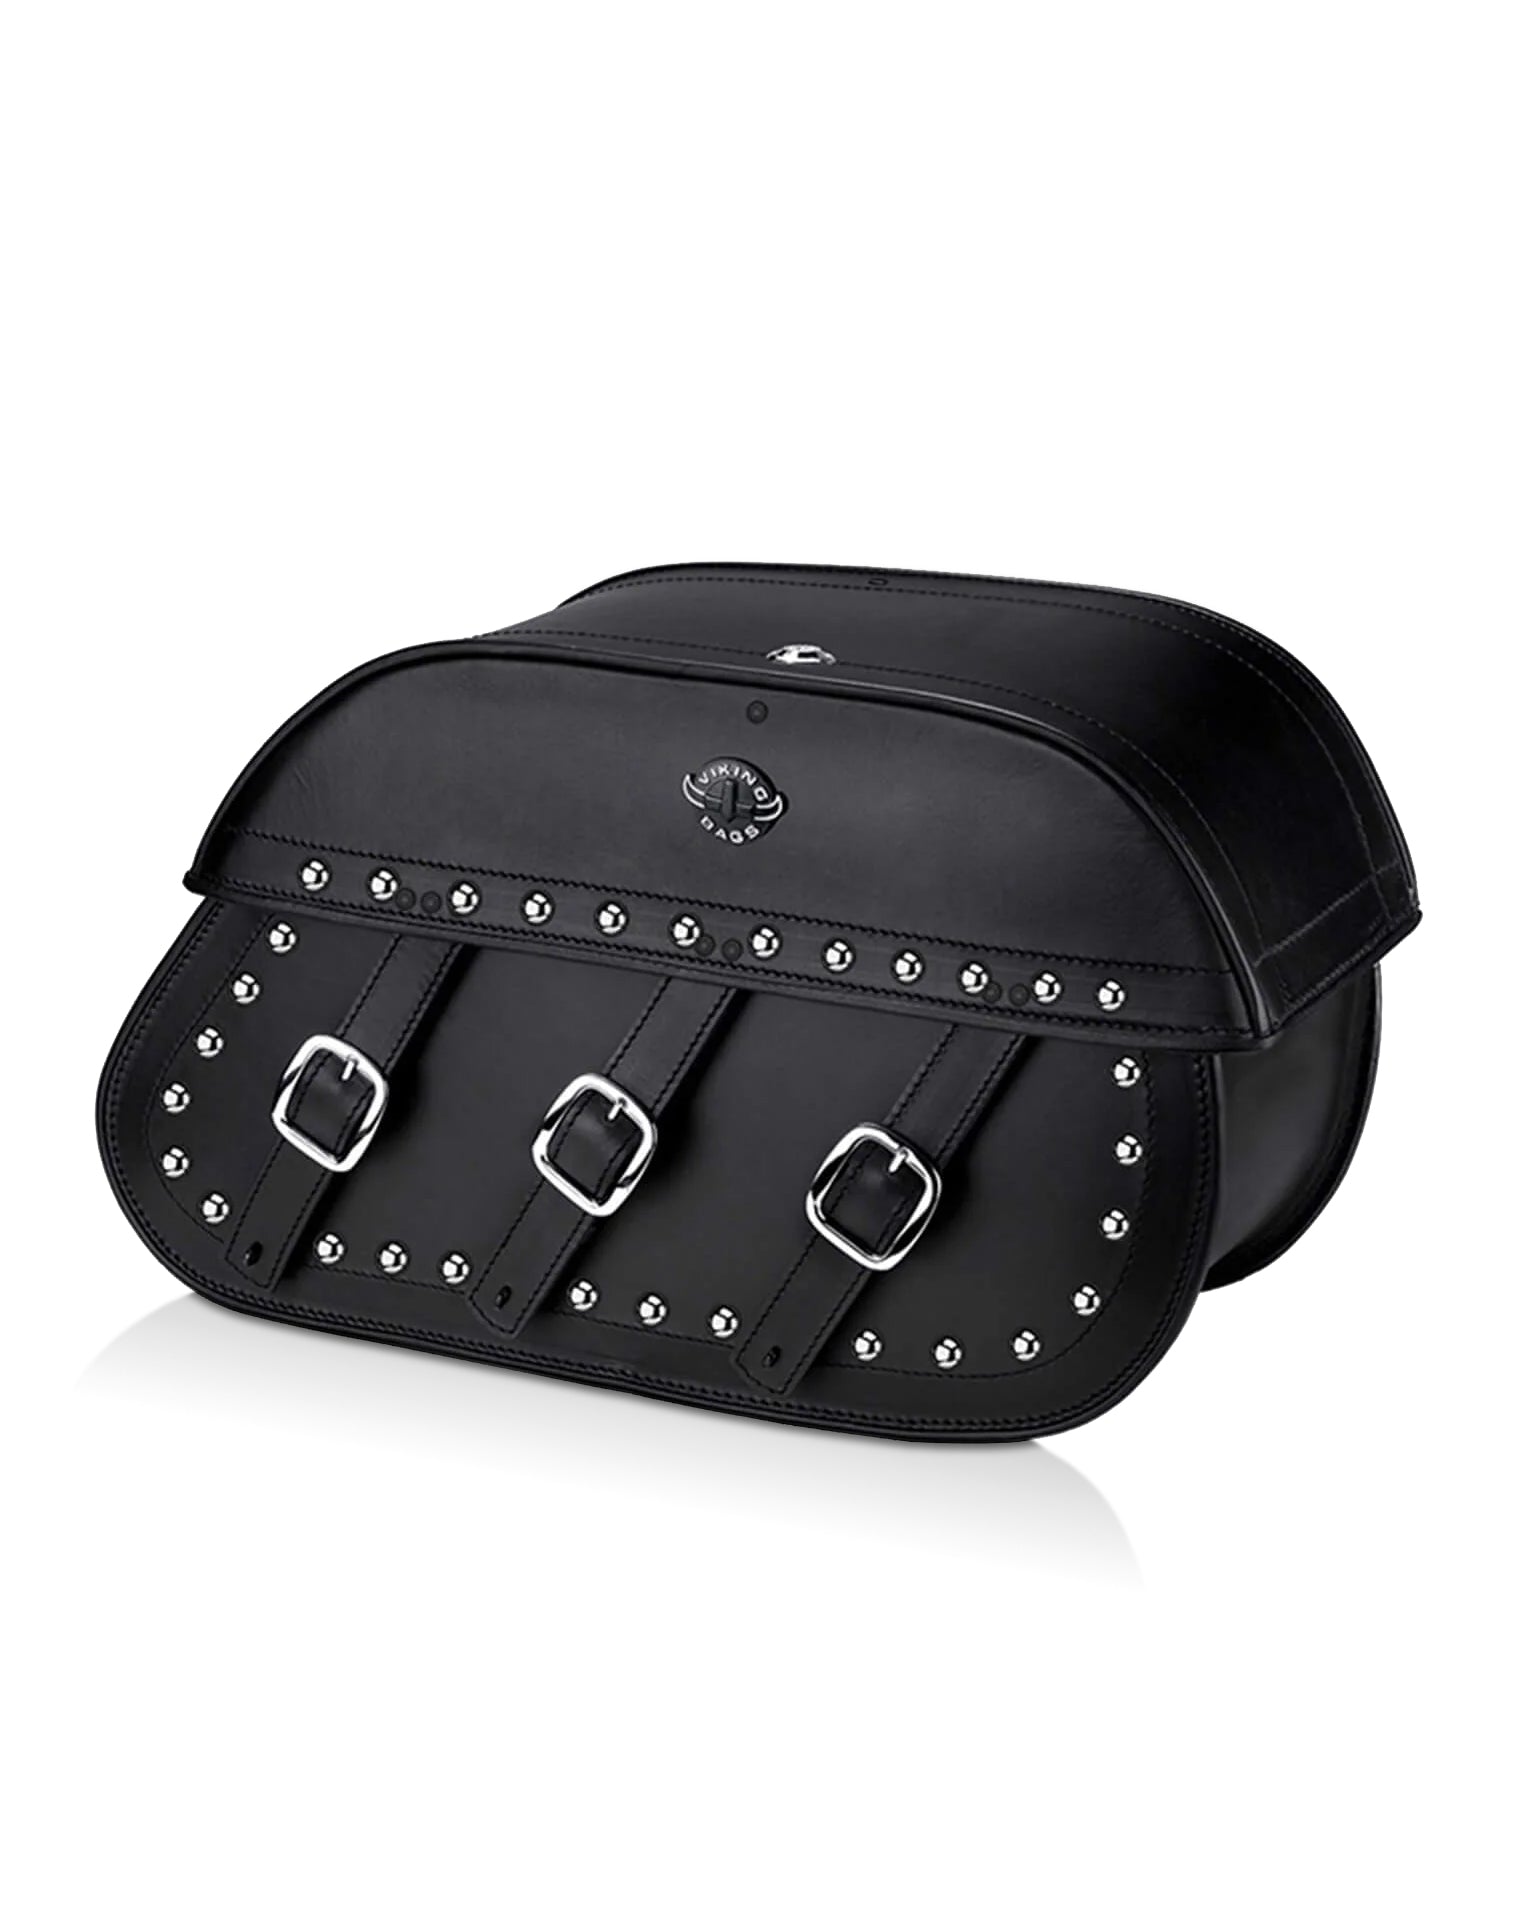 Viking Trianon Extra Large Studded Leather Motorcycle Saddlebags For Harley Softail Cross Bones Flstsb Main View